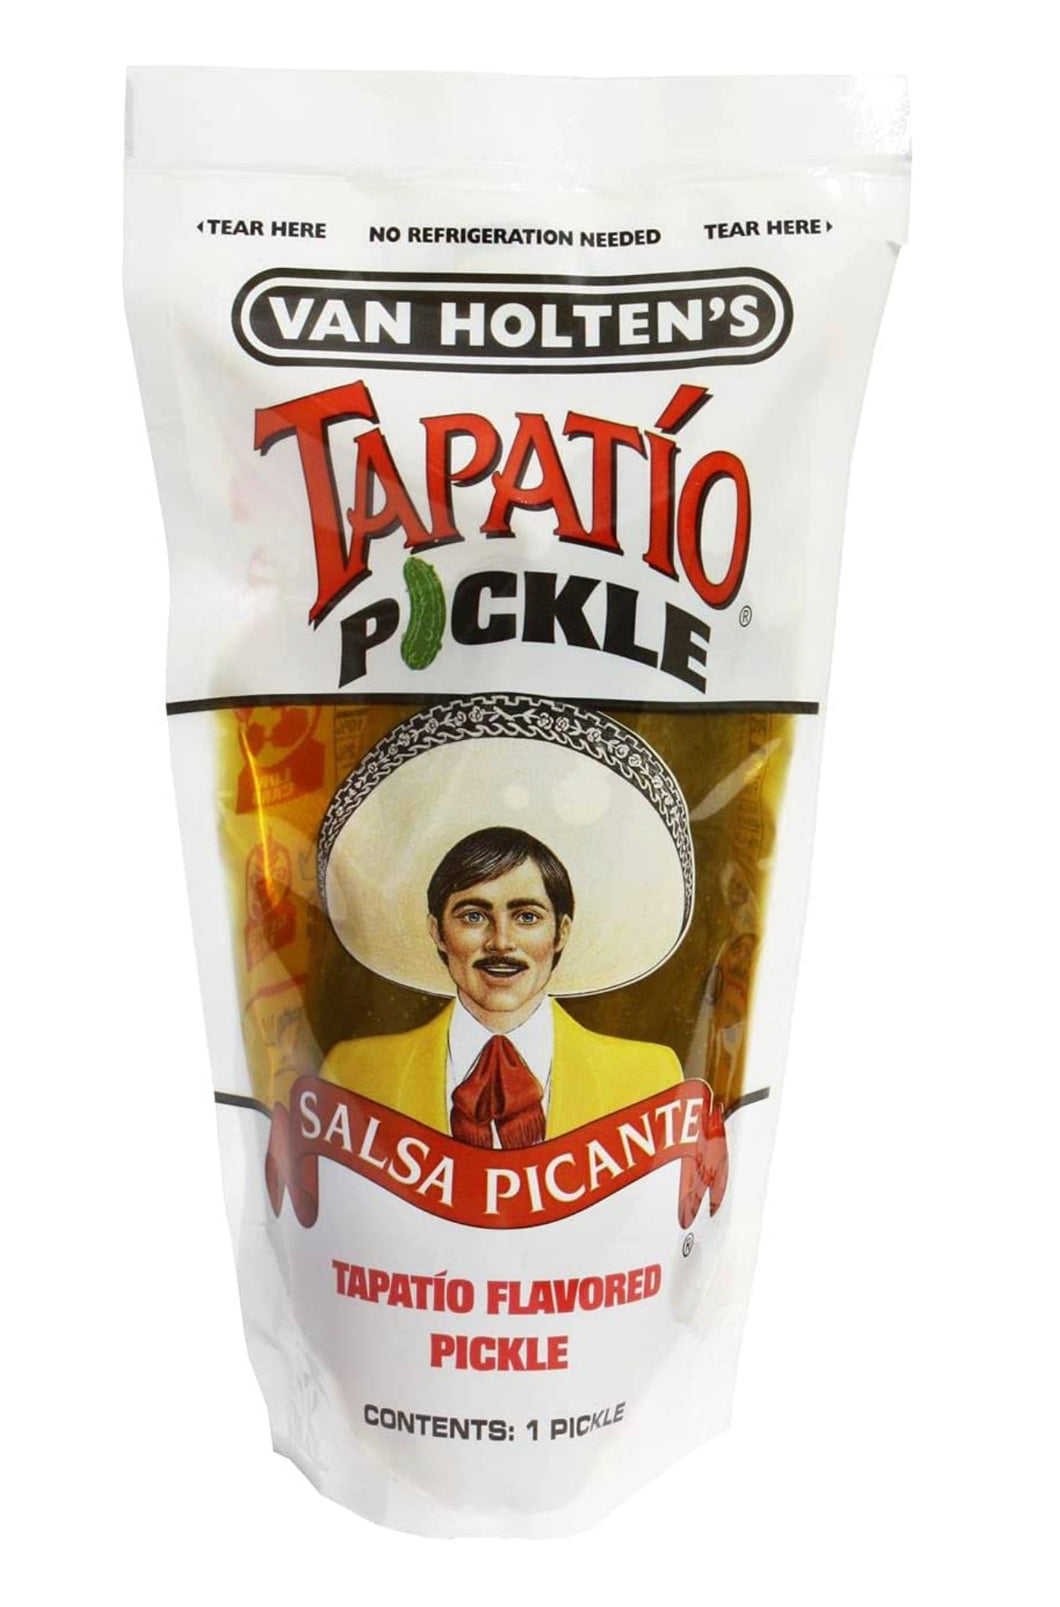 Pickle in a pouch Tapatío